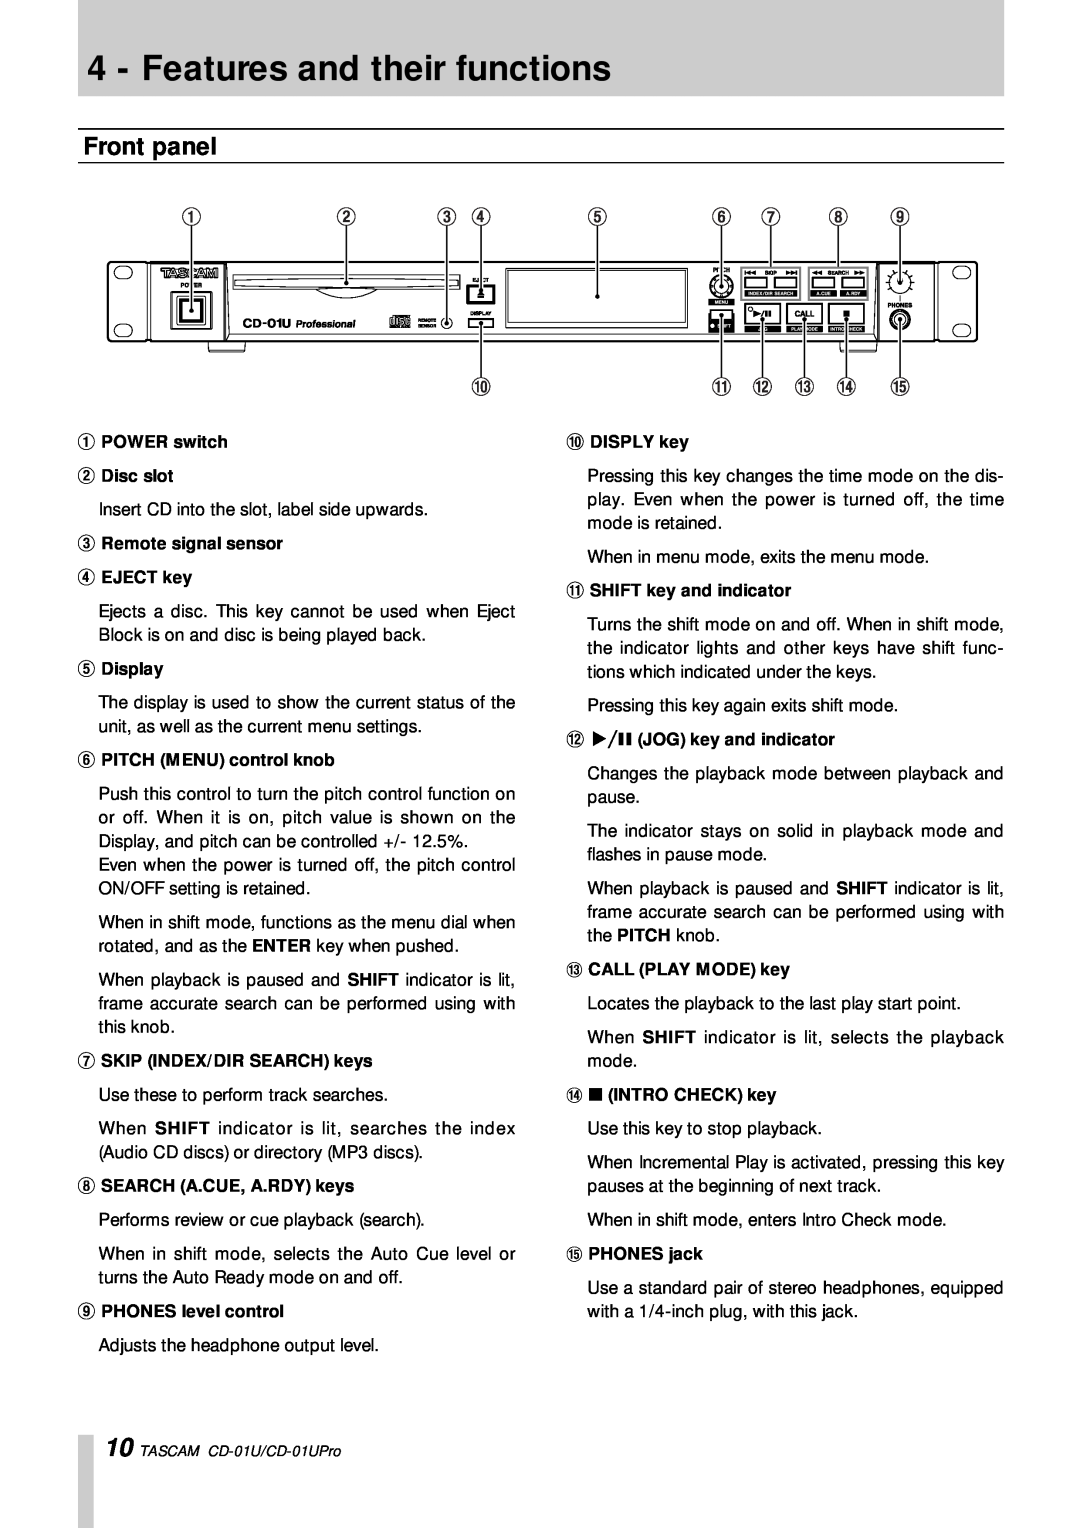 Tascam CD-01 U, CD-01UPro owner manual Features and their functions, Front panel 